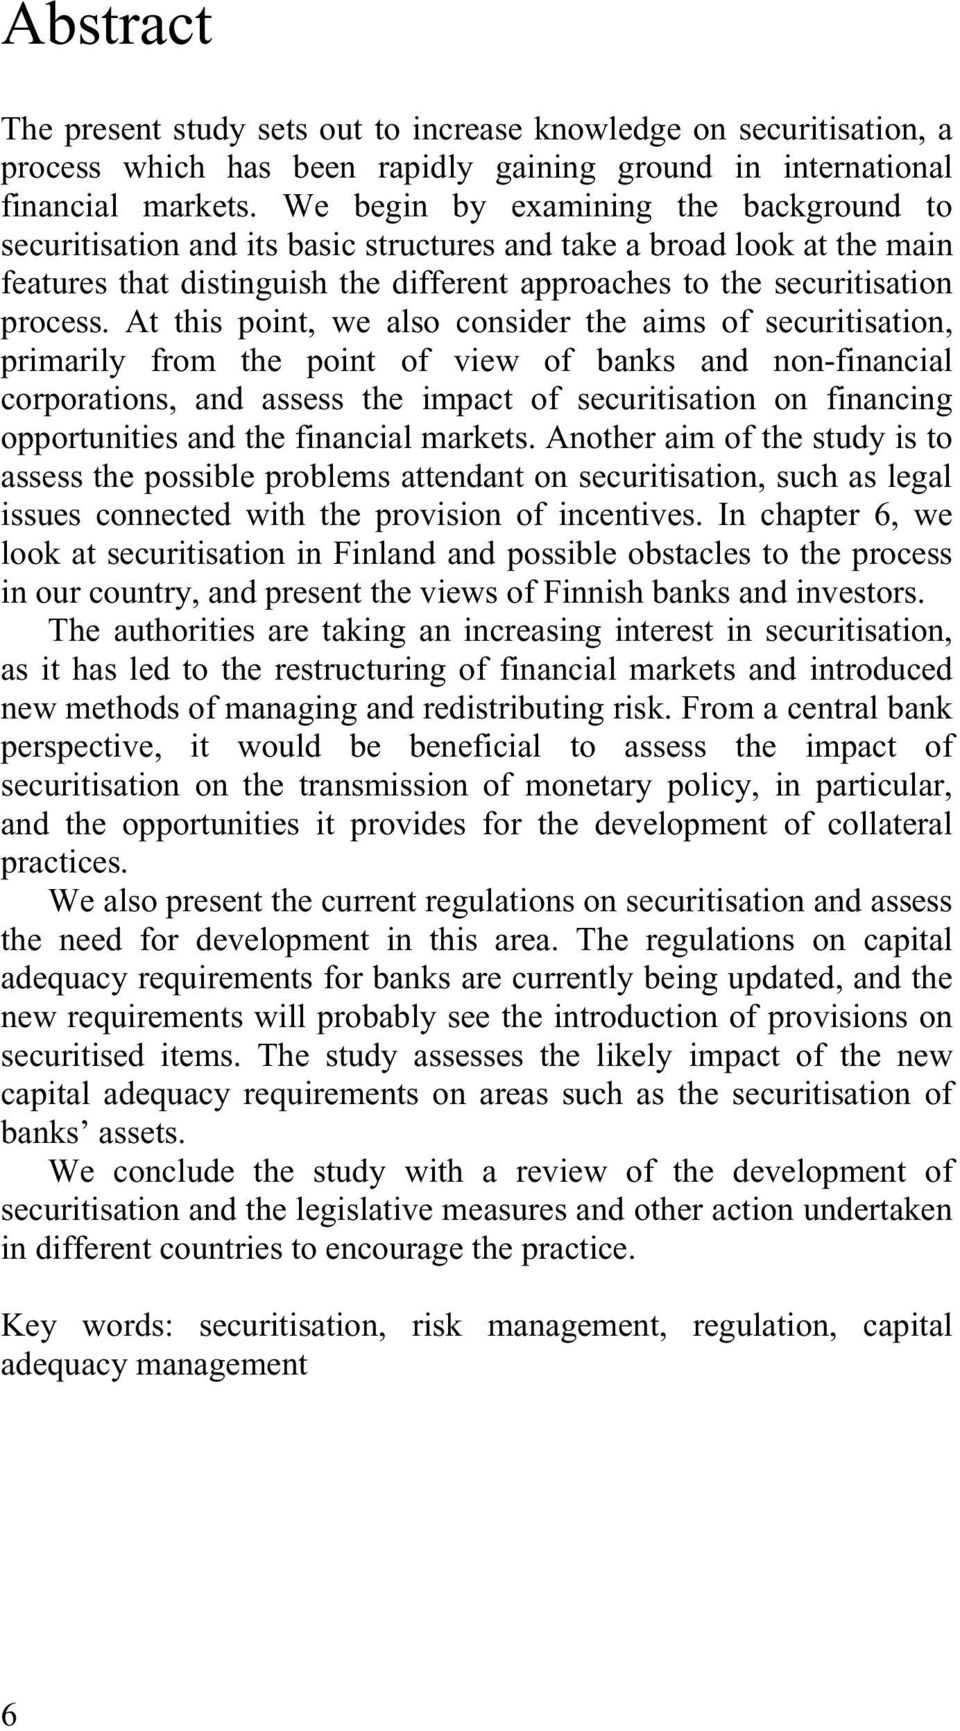 At this point, we also consider the aims of securitisation, primarily from the point of view of banks and non-financial corporations, and assess the impact of securitisation on financing